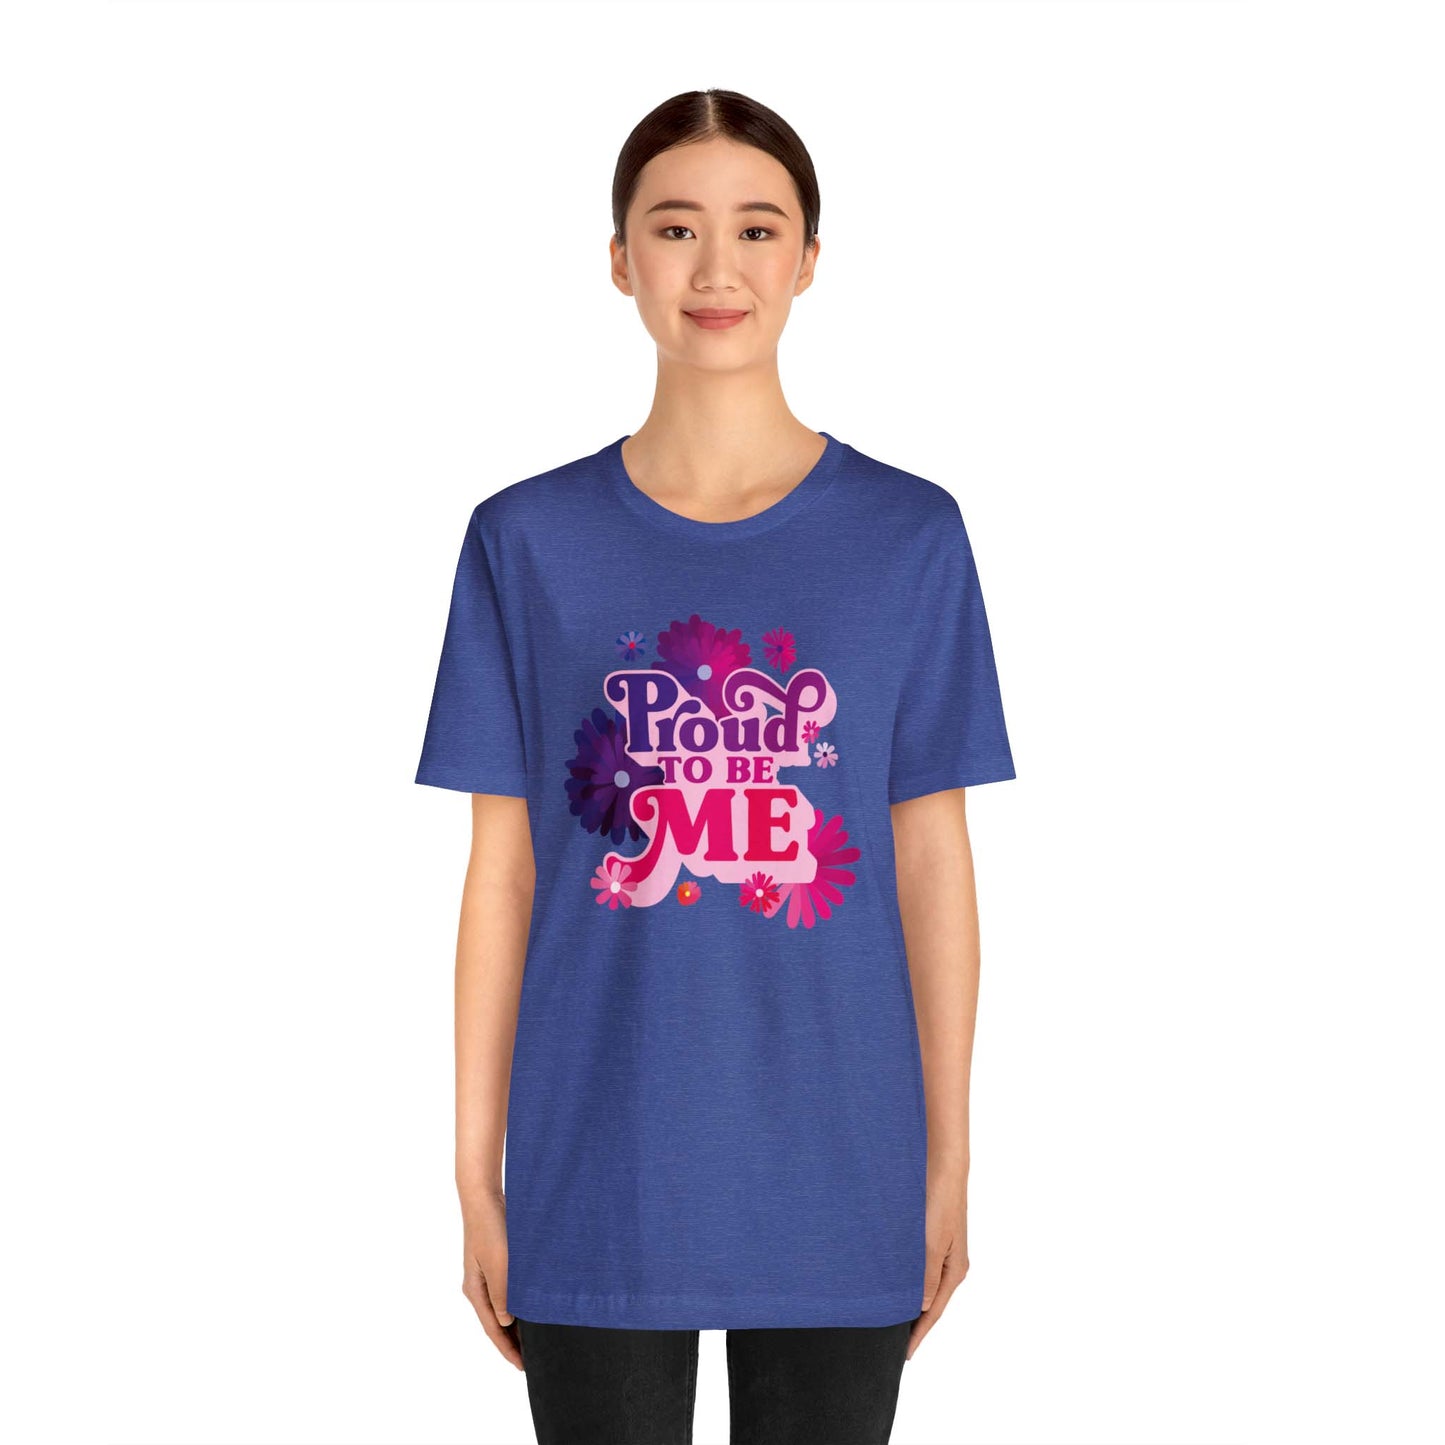 This comfy and relaxed T-shirt is for woman who are proud to be who they are! Are you proud to be you? This t-shirt is the perfect addition to your wardrobe.